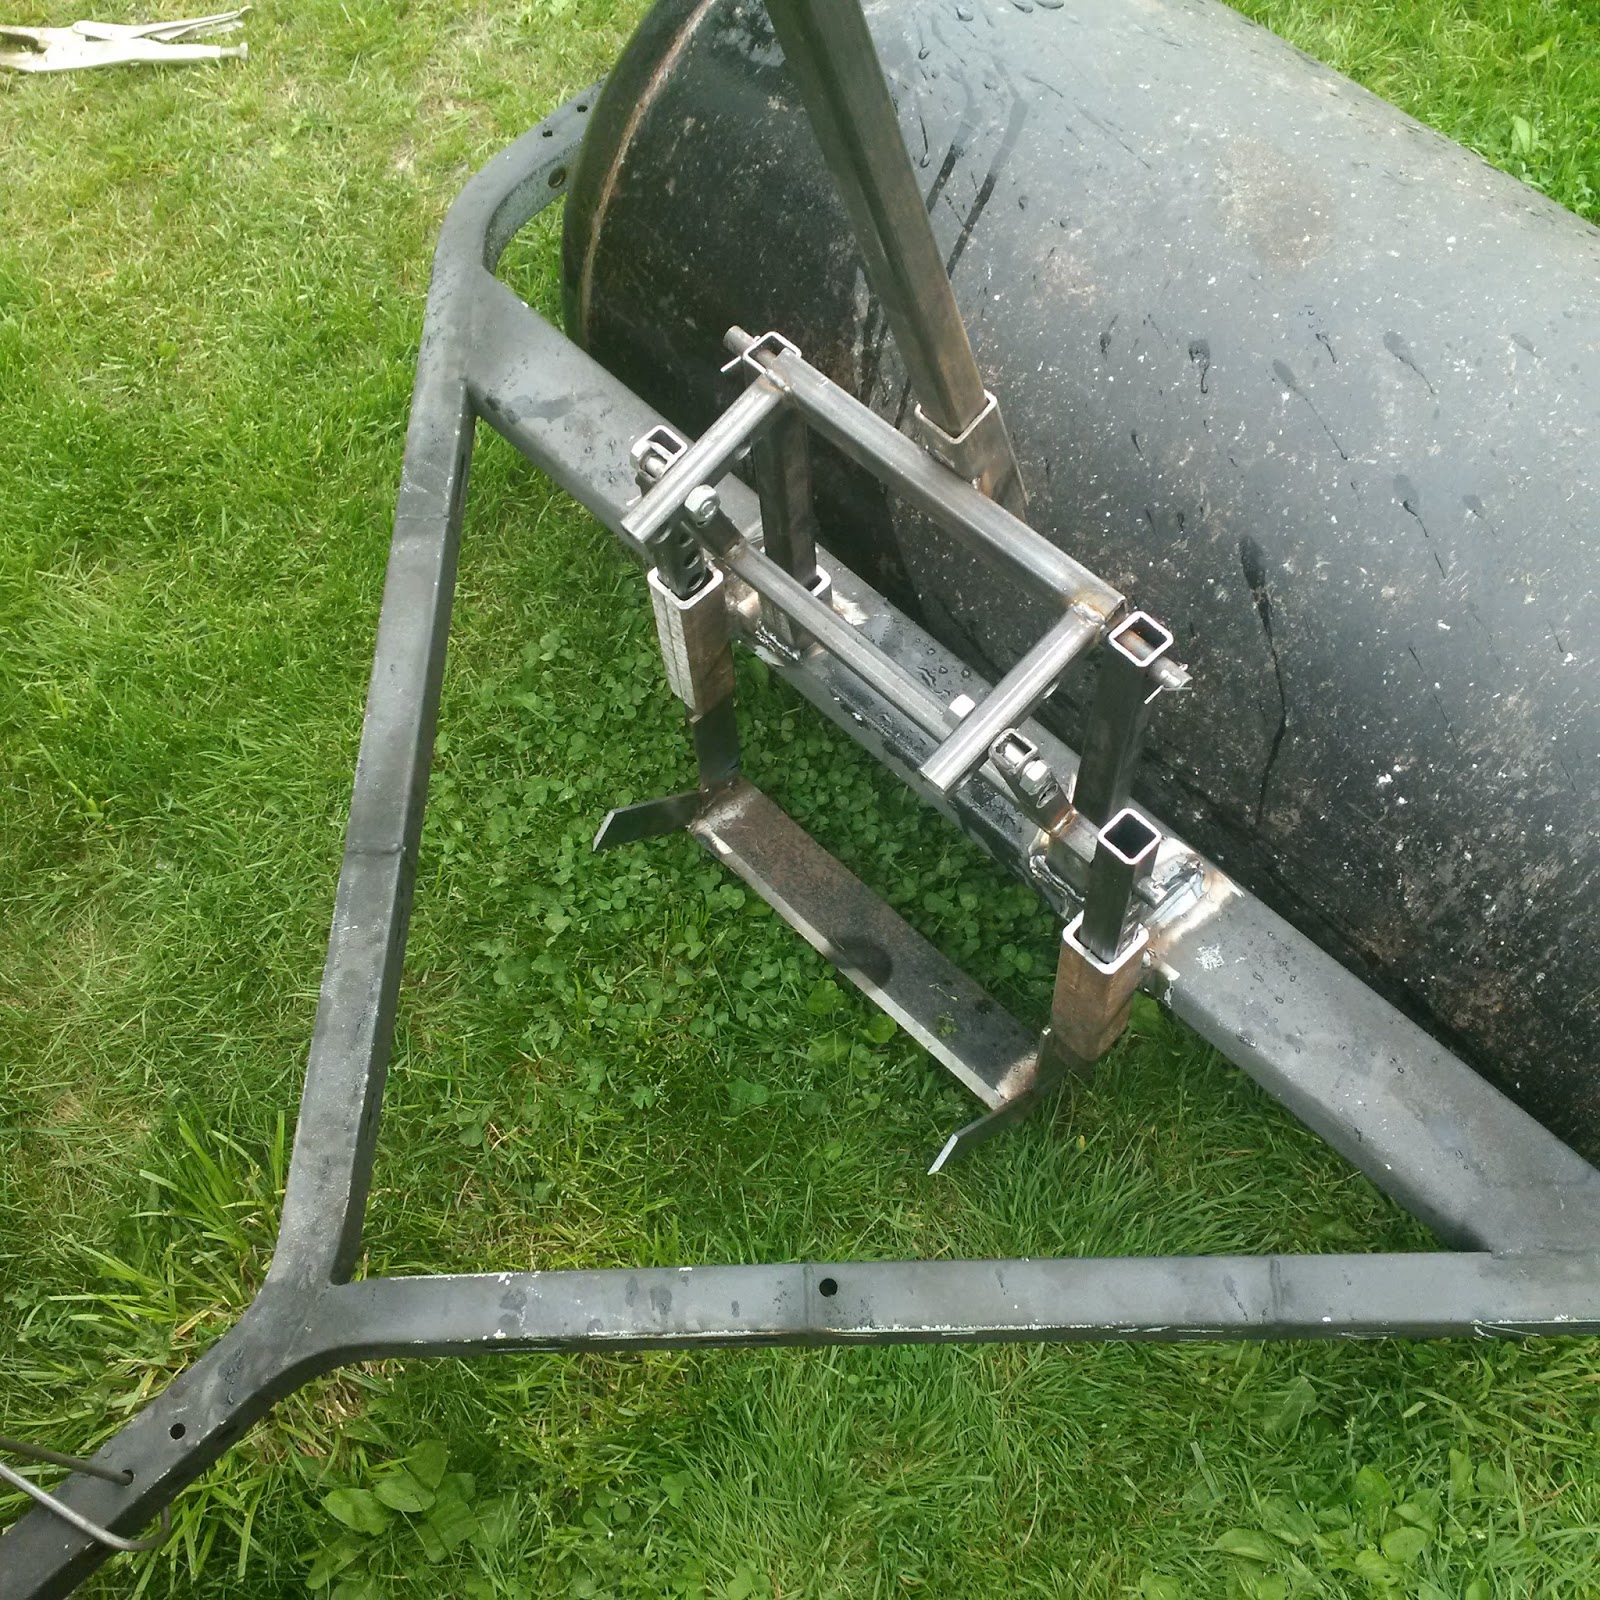 Another Day Another Project: Creating a Sod Cutter Attachment for Lawn